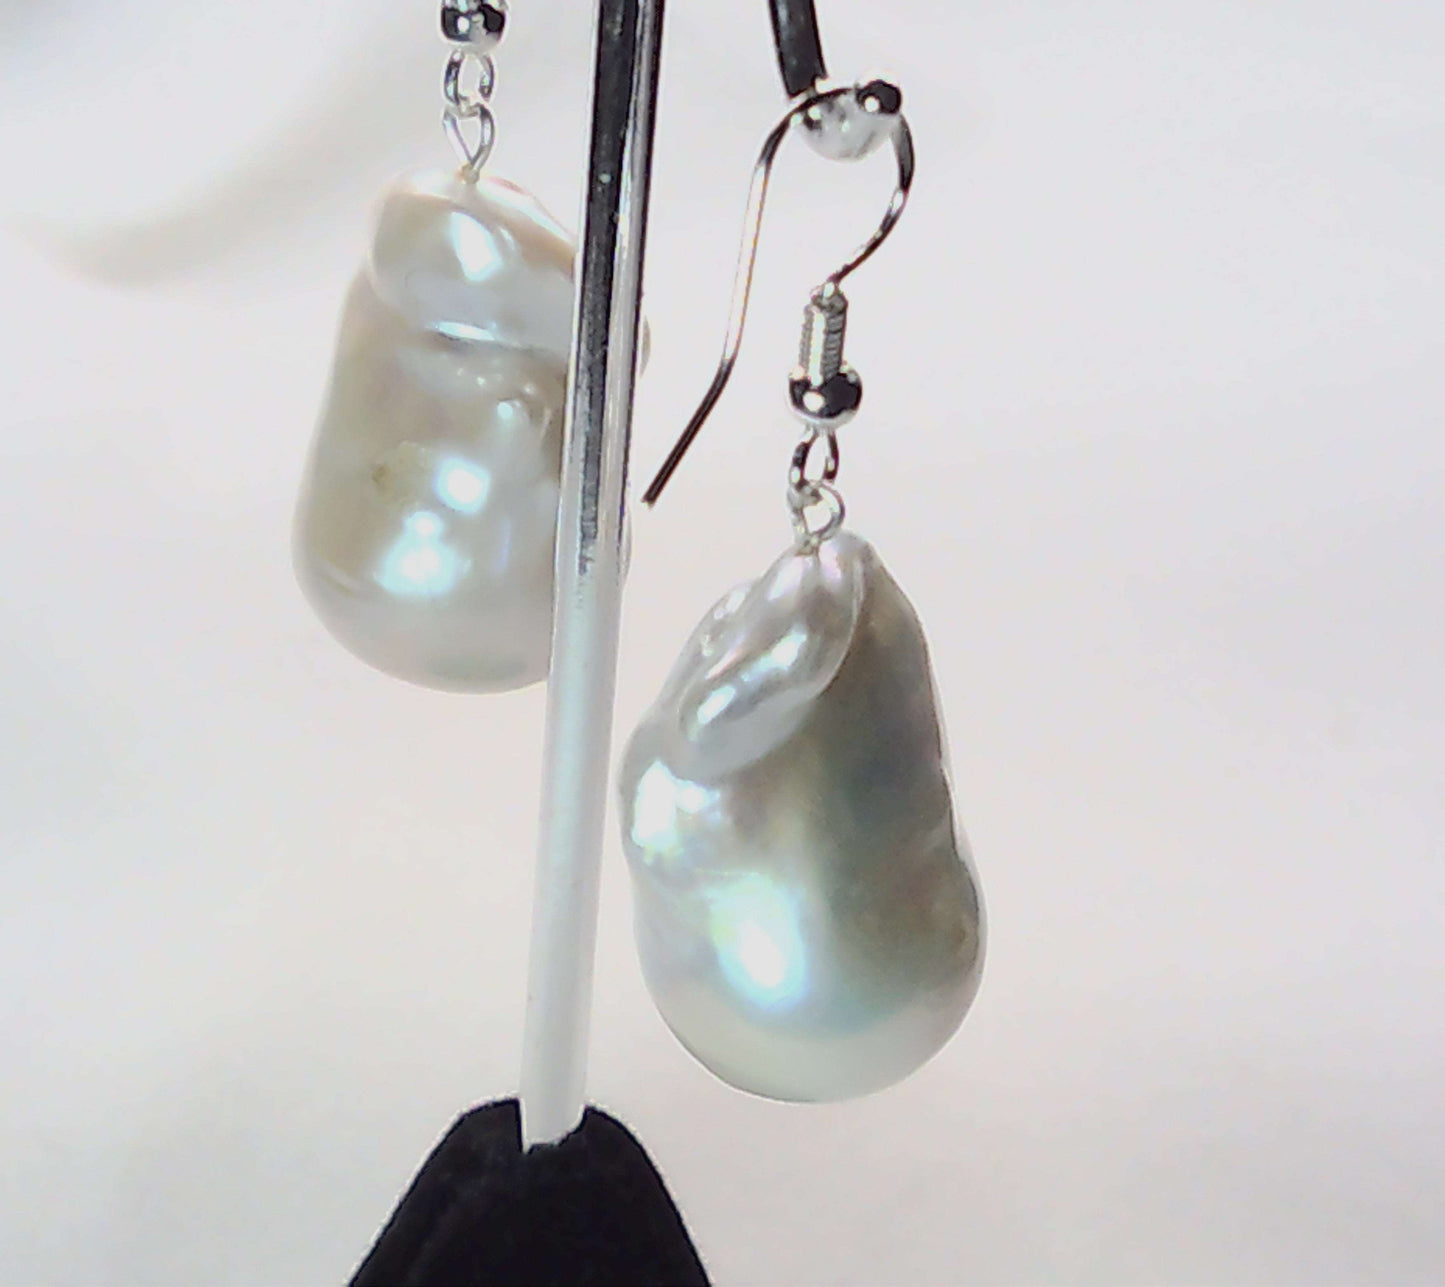 Baroque Pearl earring Many Styles in Sterling Silver - Providence silver gold jewelry usa